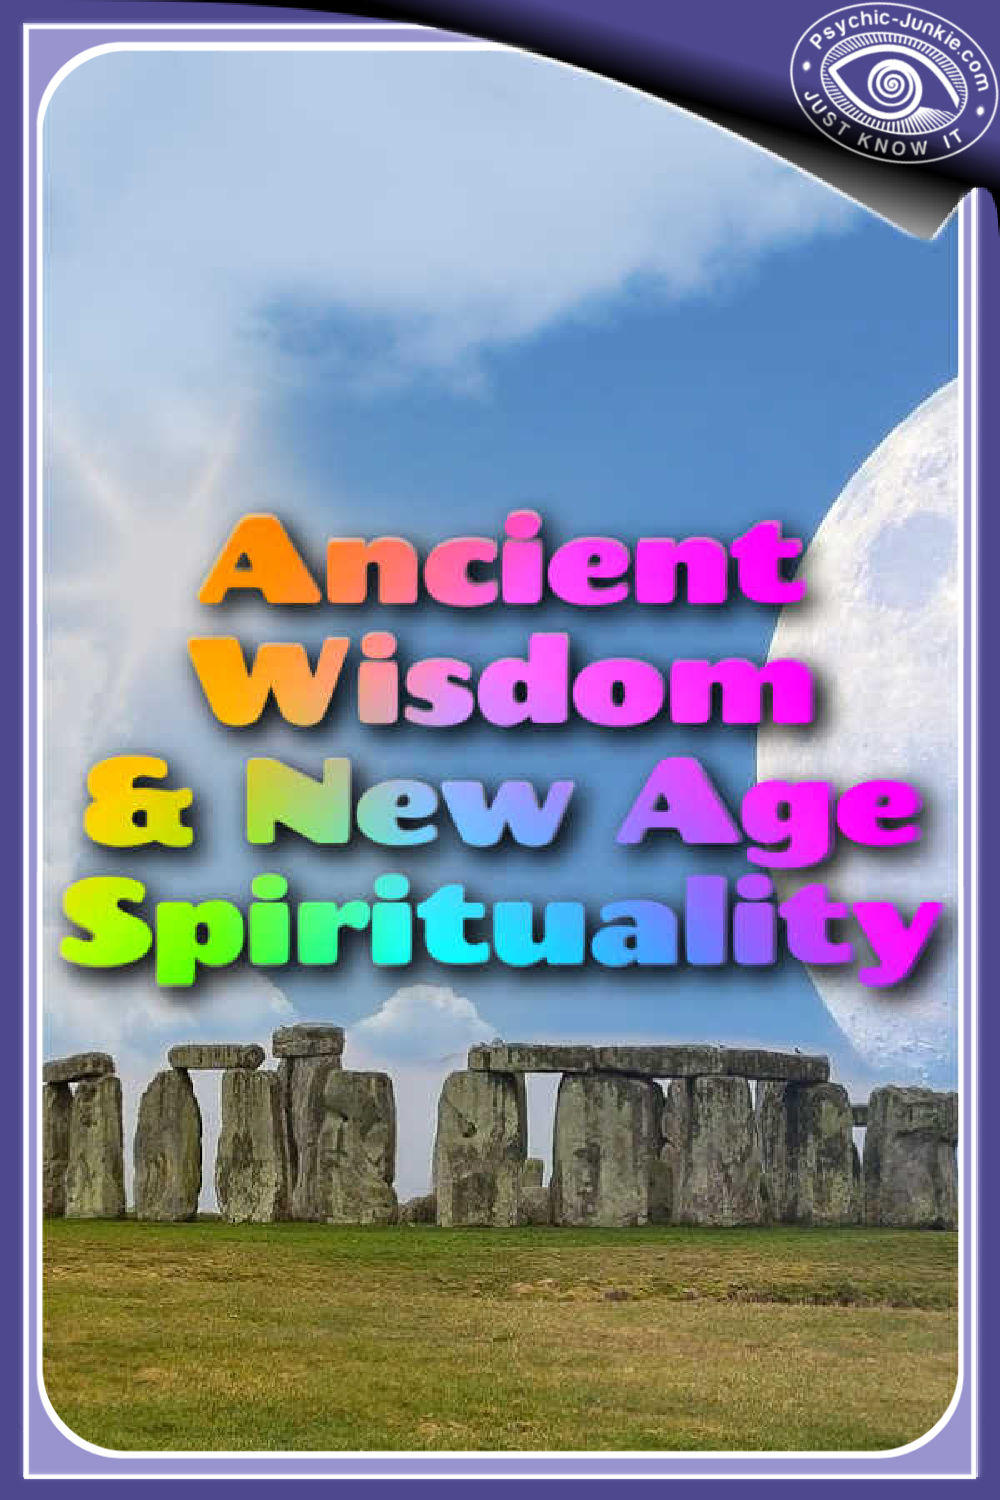 What Is New Age Spirituality Based Upon?